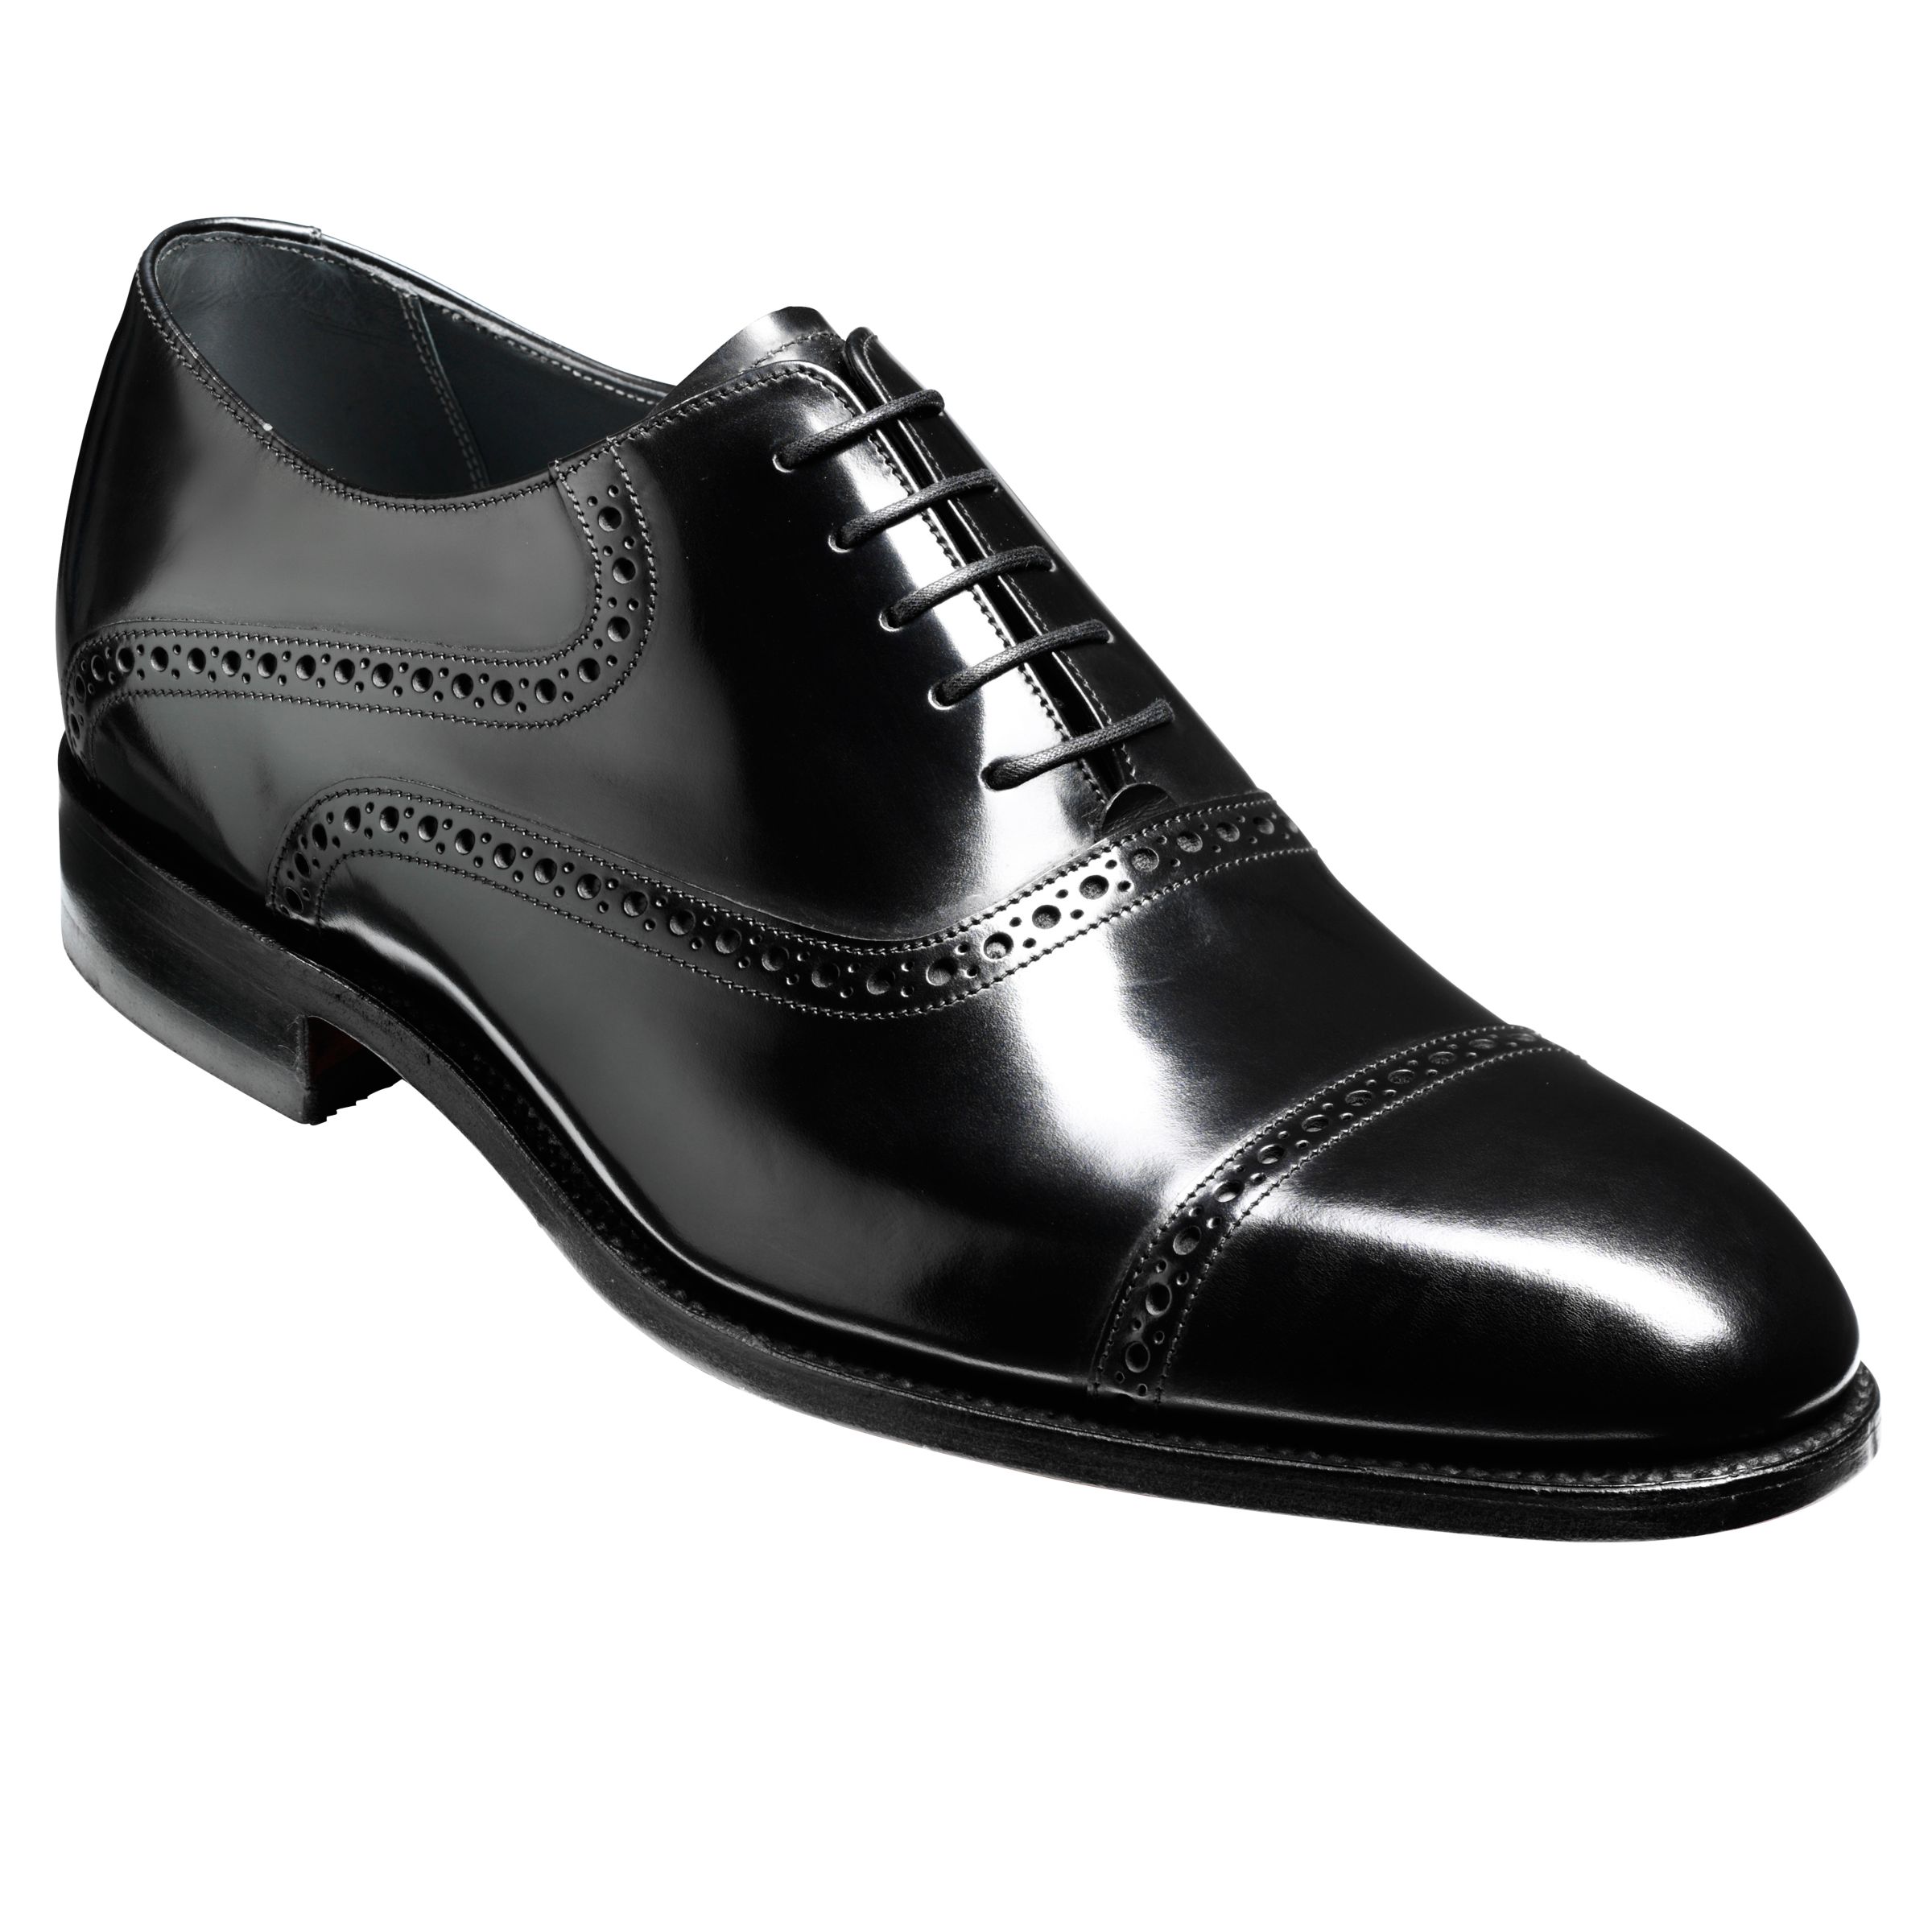 Barker Wilton Goodyear Welt Leather Oxford Shoes, Black at John Lewis